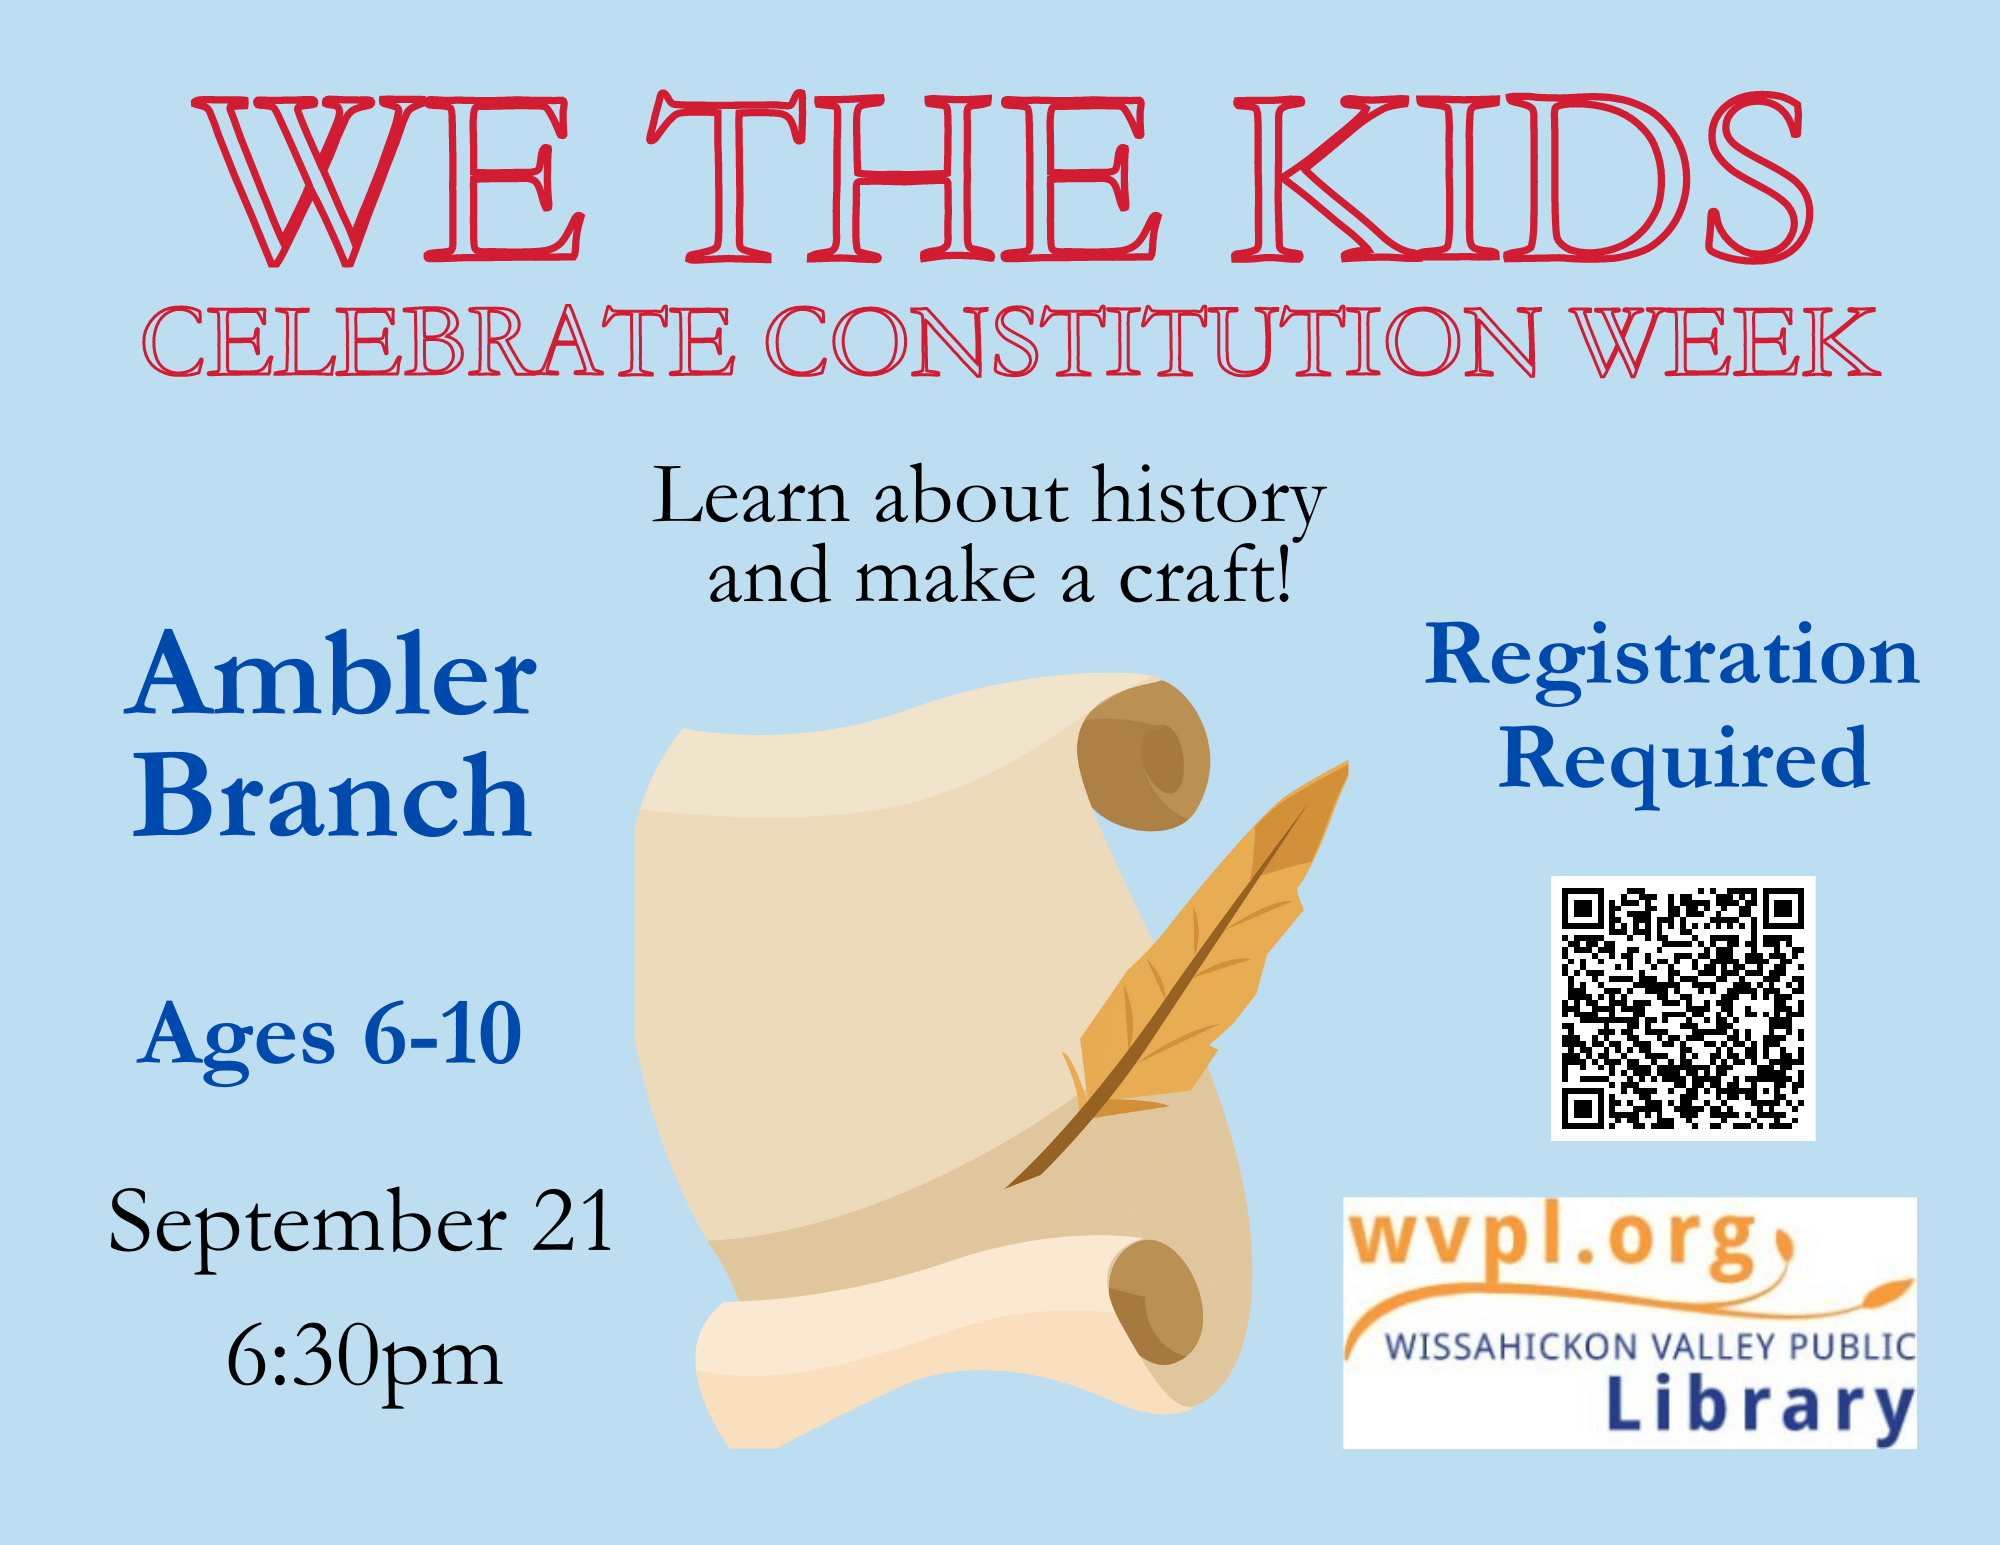 We the Kids: Constitution Week! Learn about history and make a craft.